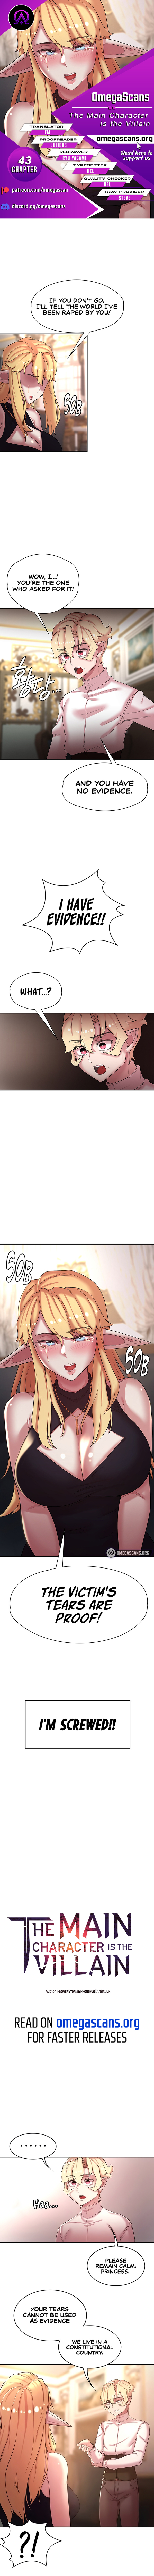 Panel Image 1 for chapter 43 of manhwa The Main Character Is the Villain on read.oppai.stream